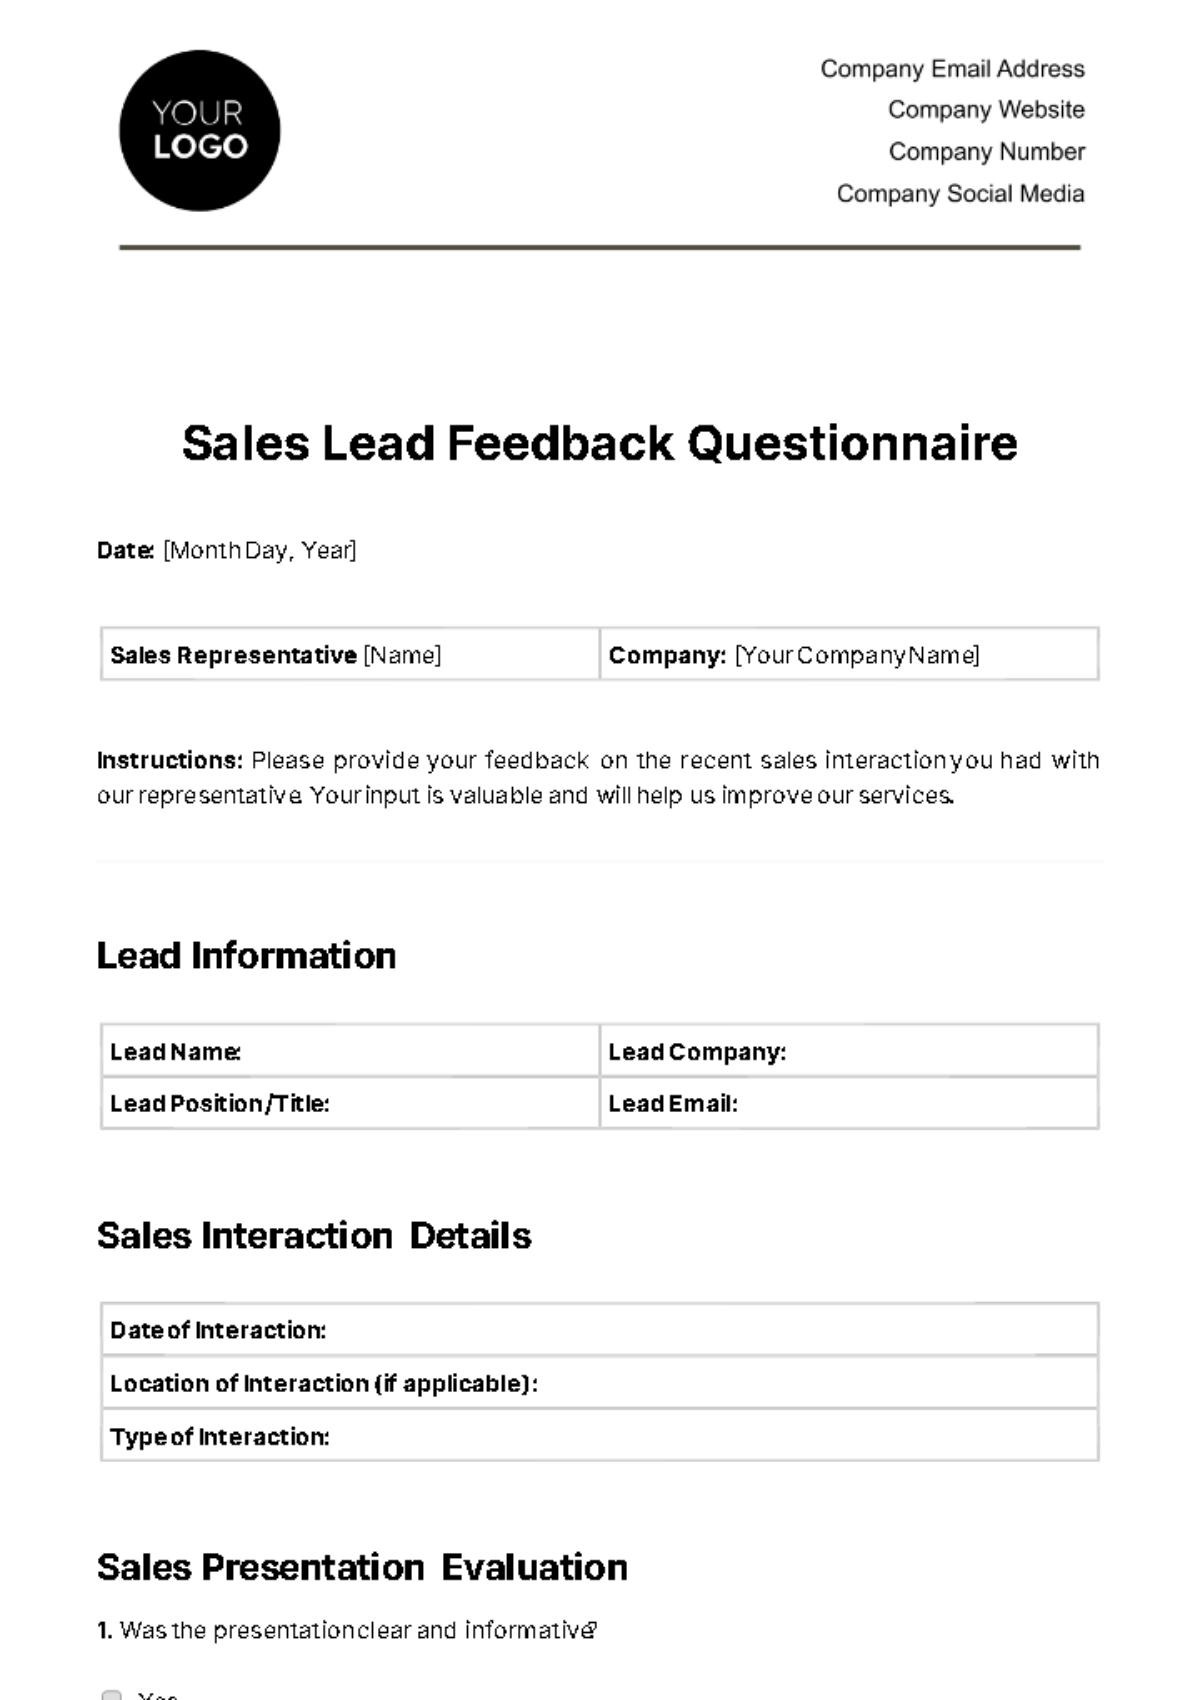 Sales Lead Feedback Questionnaire Template